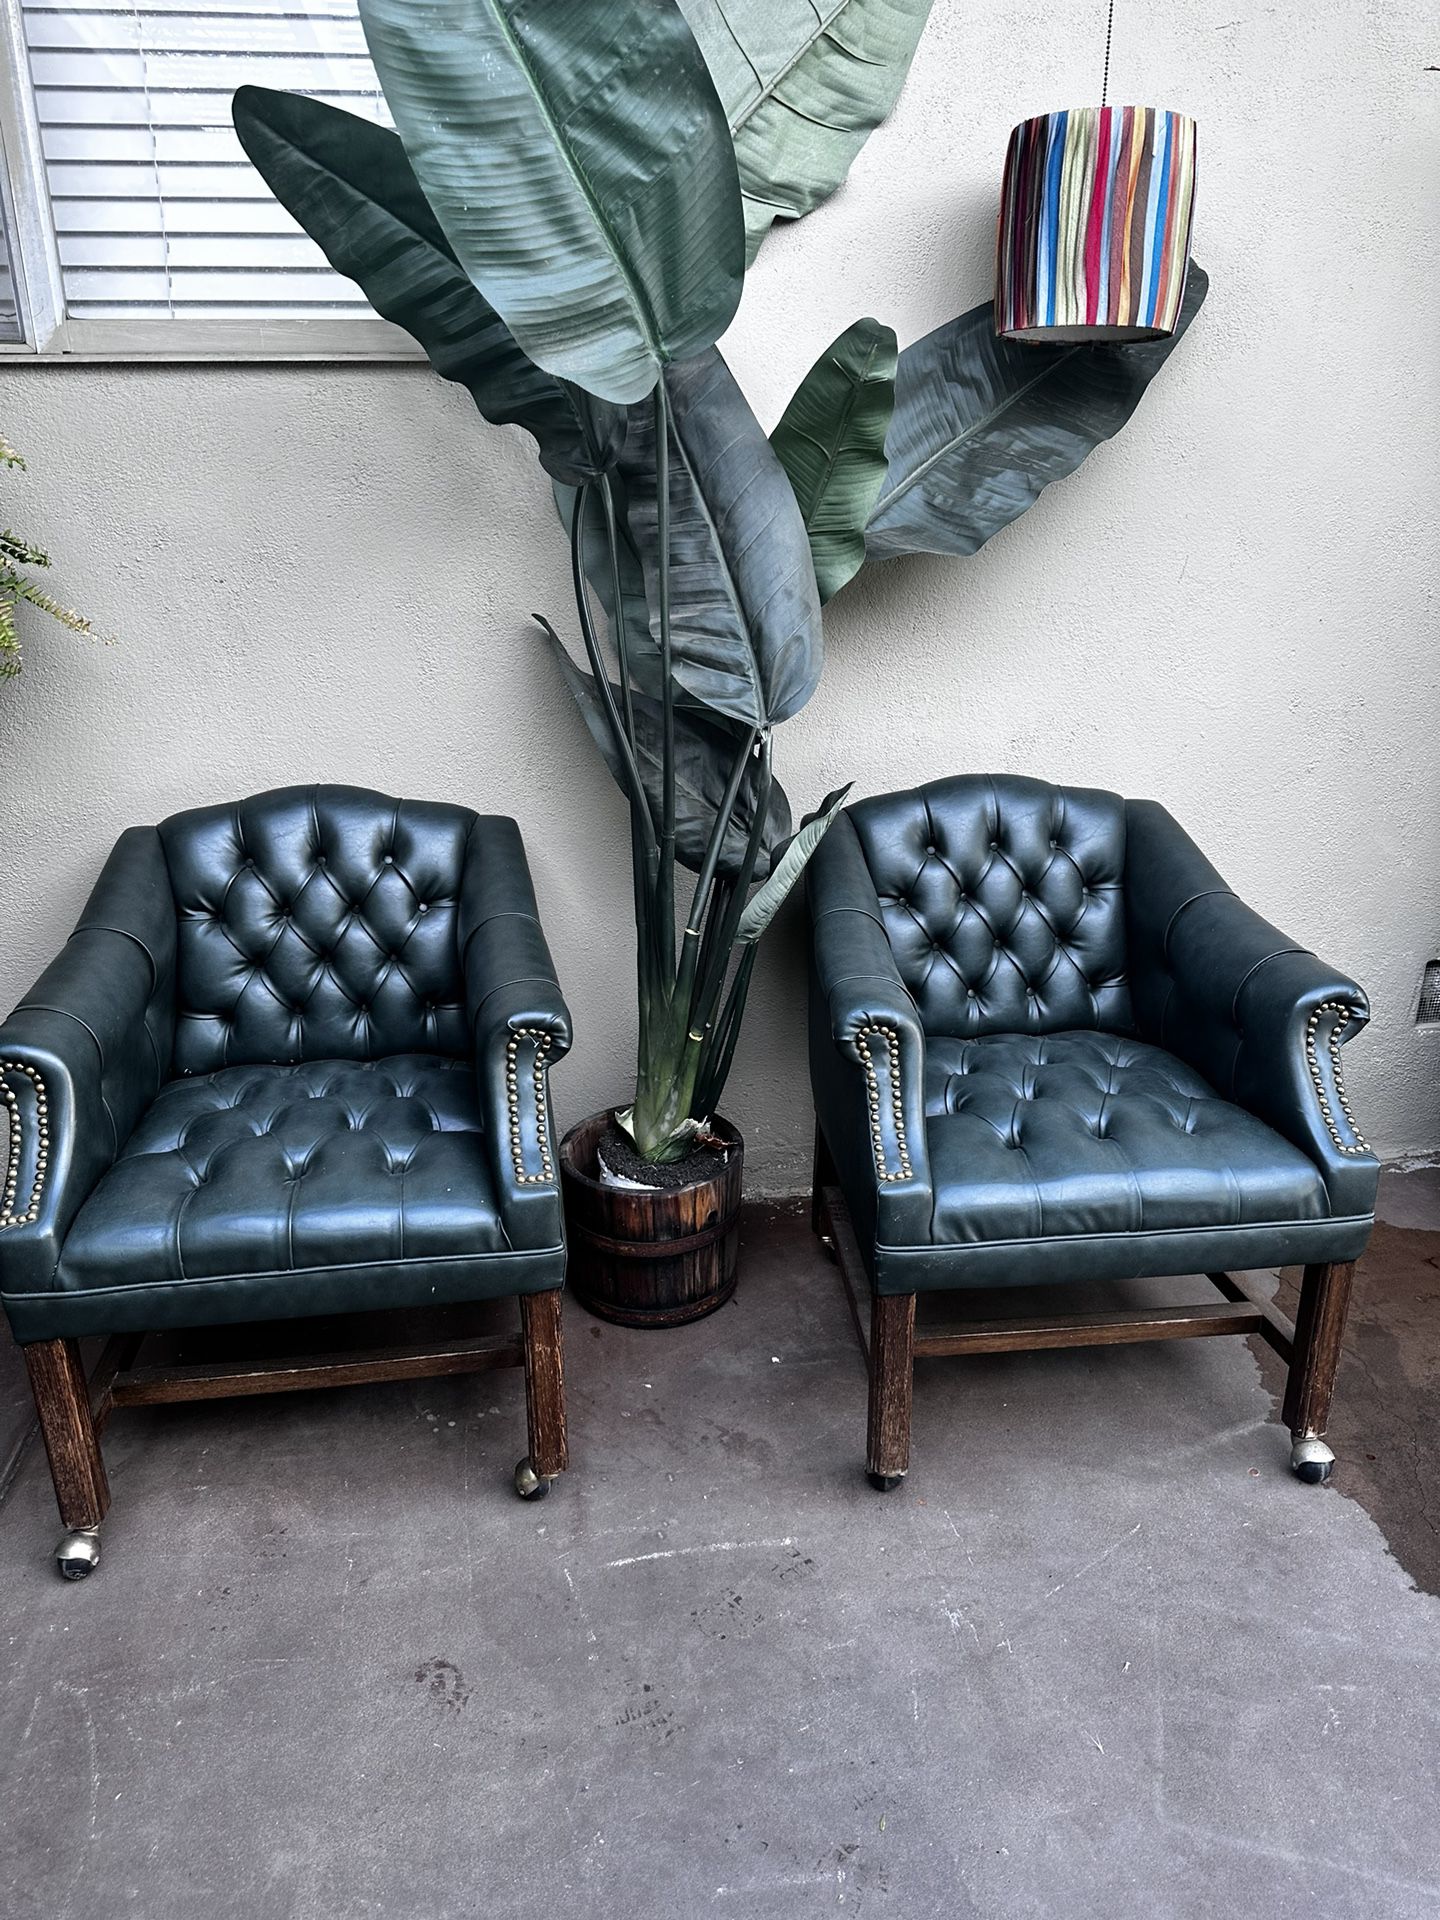 3 LEFT  Vintage Green Chesterfield Chairs - 5 Total  125 Each Obo On All 